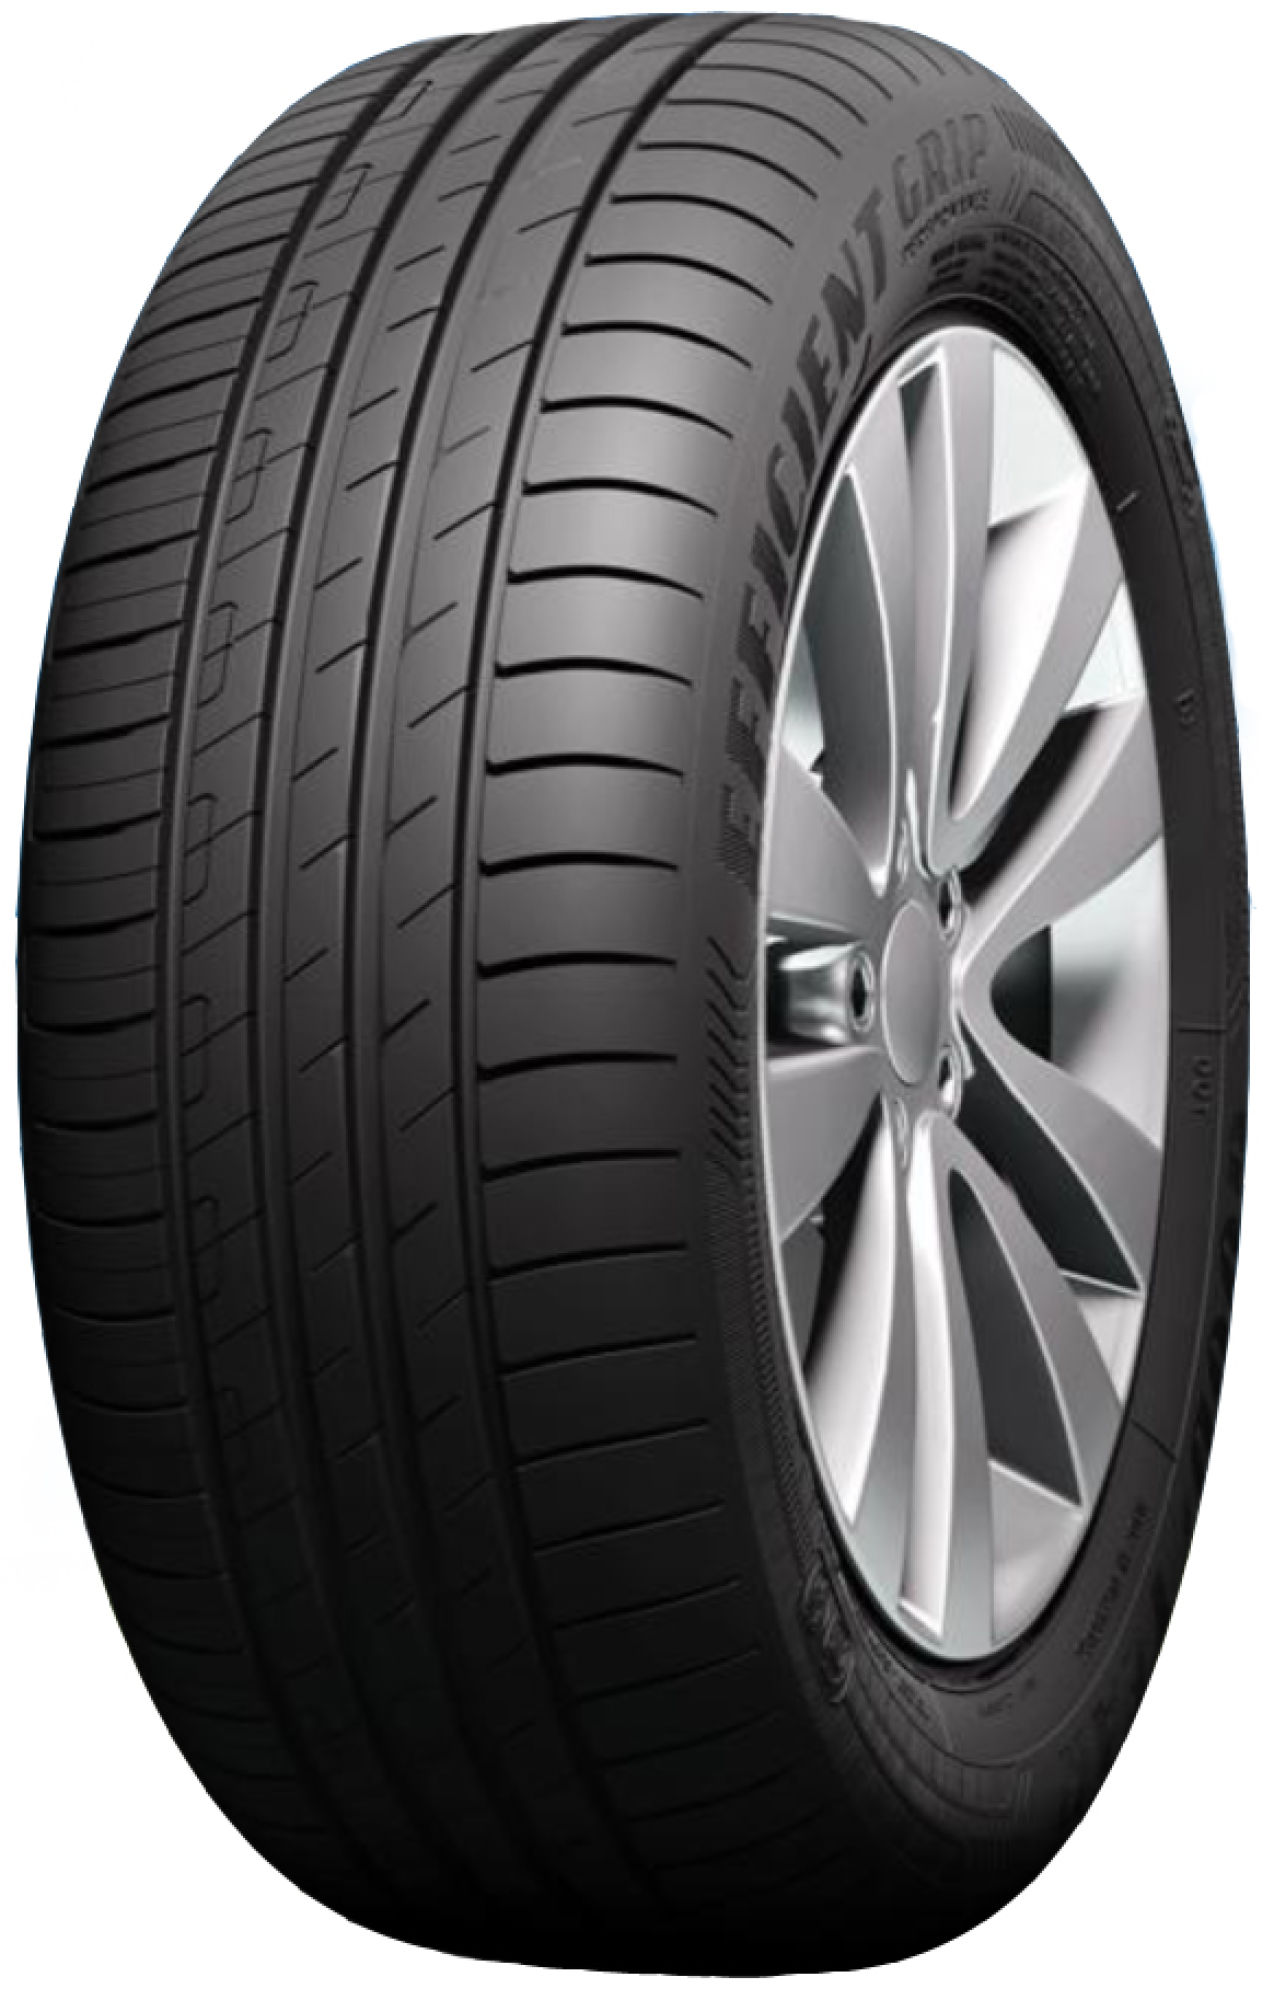 album cricket charm Goodyear EfficientGrip Performance - Tire Reviews and Tests